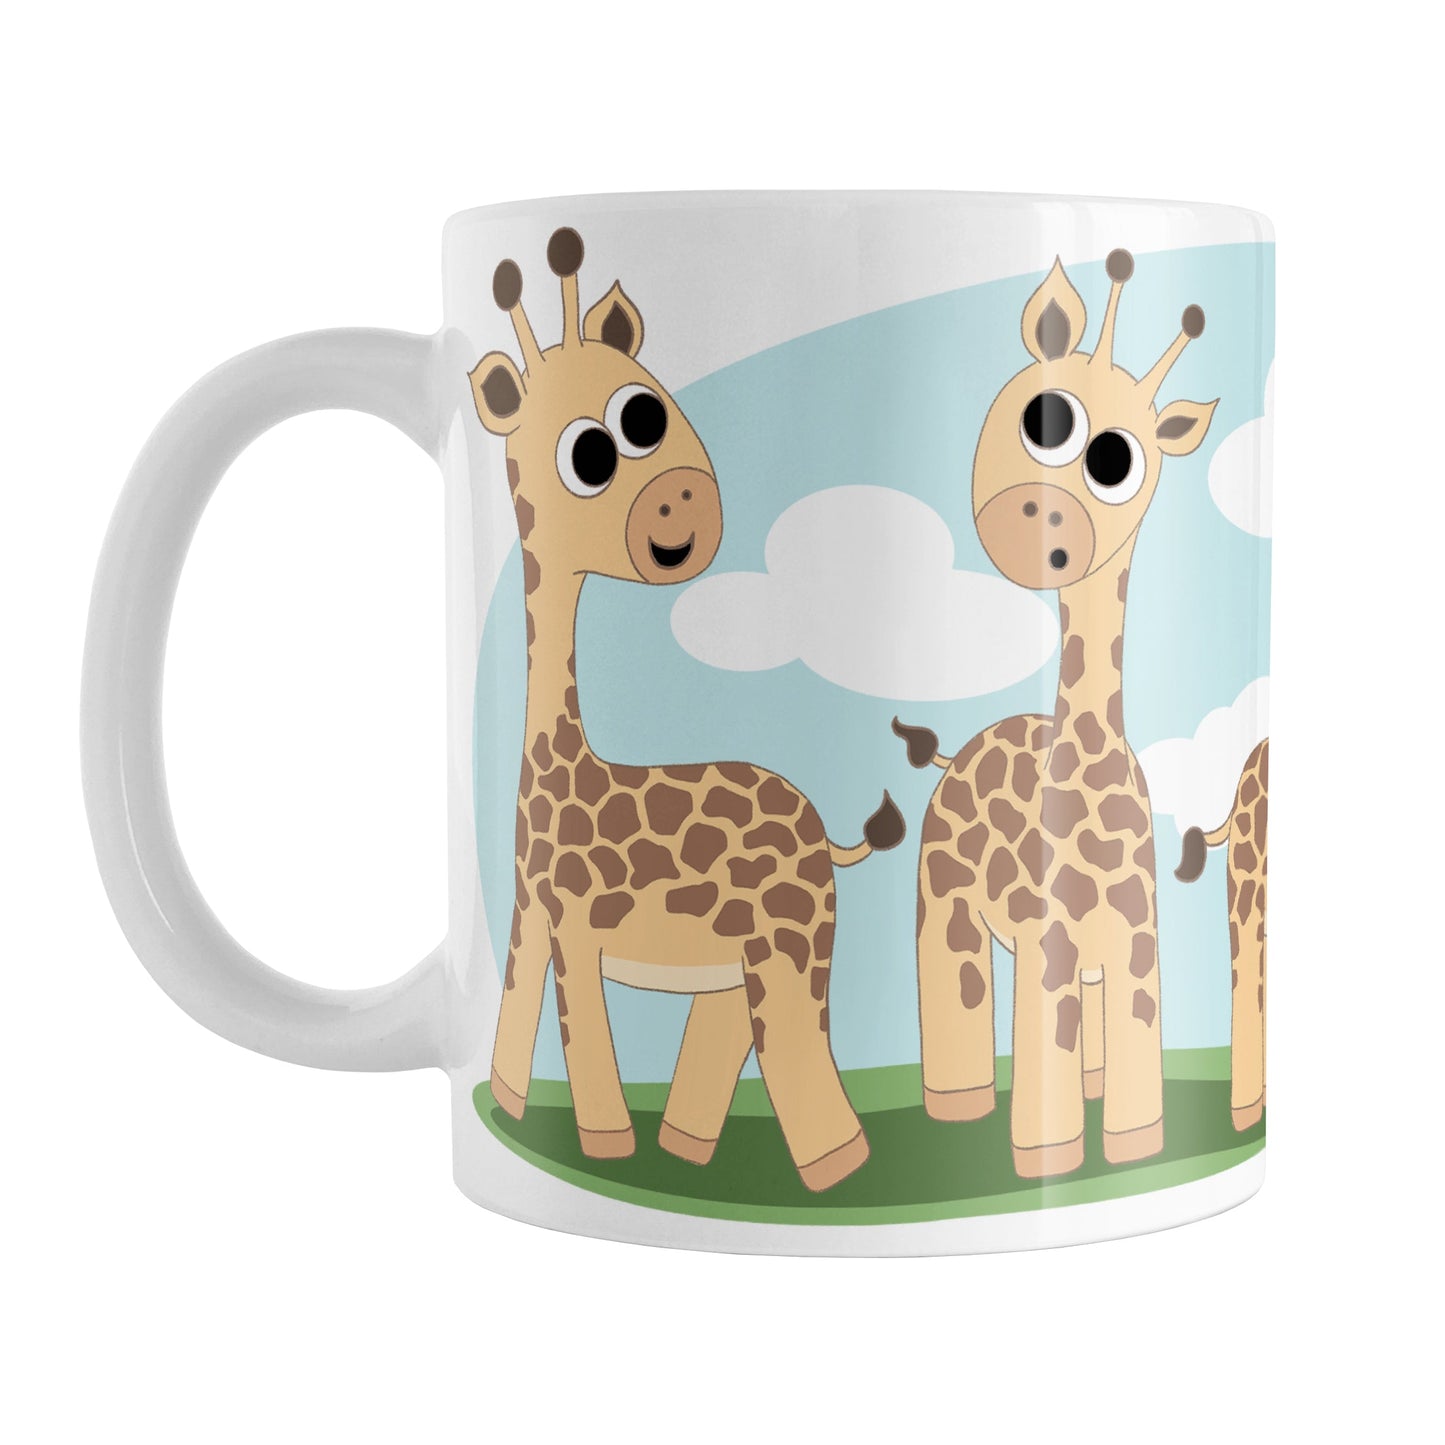 Gathering Giraffes Mug (11oz) at Amy's Coffee Mugs. A ceramic coffee mug designed with five cute illustrated giraffes, with different expressions, around the mug, over a blue sky and green grass background.